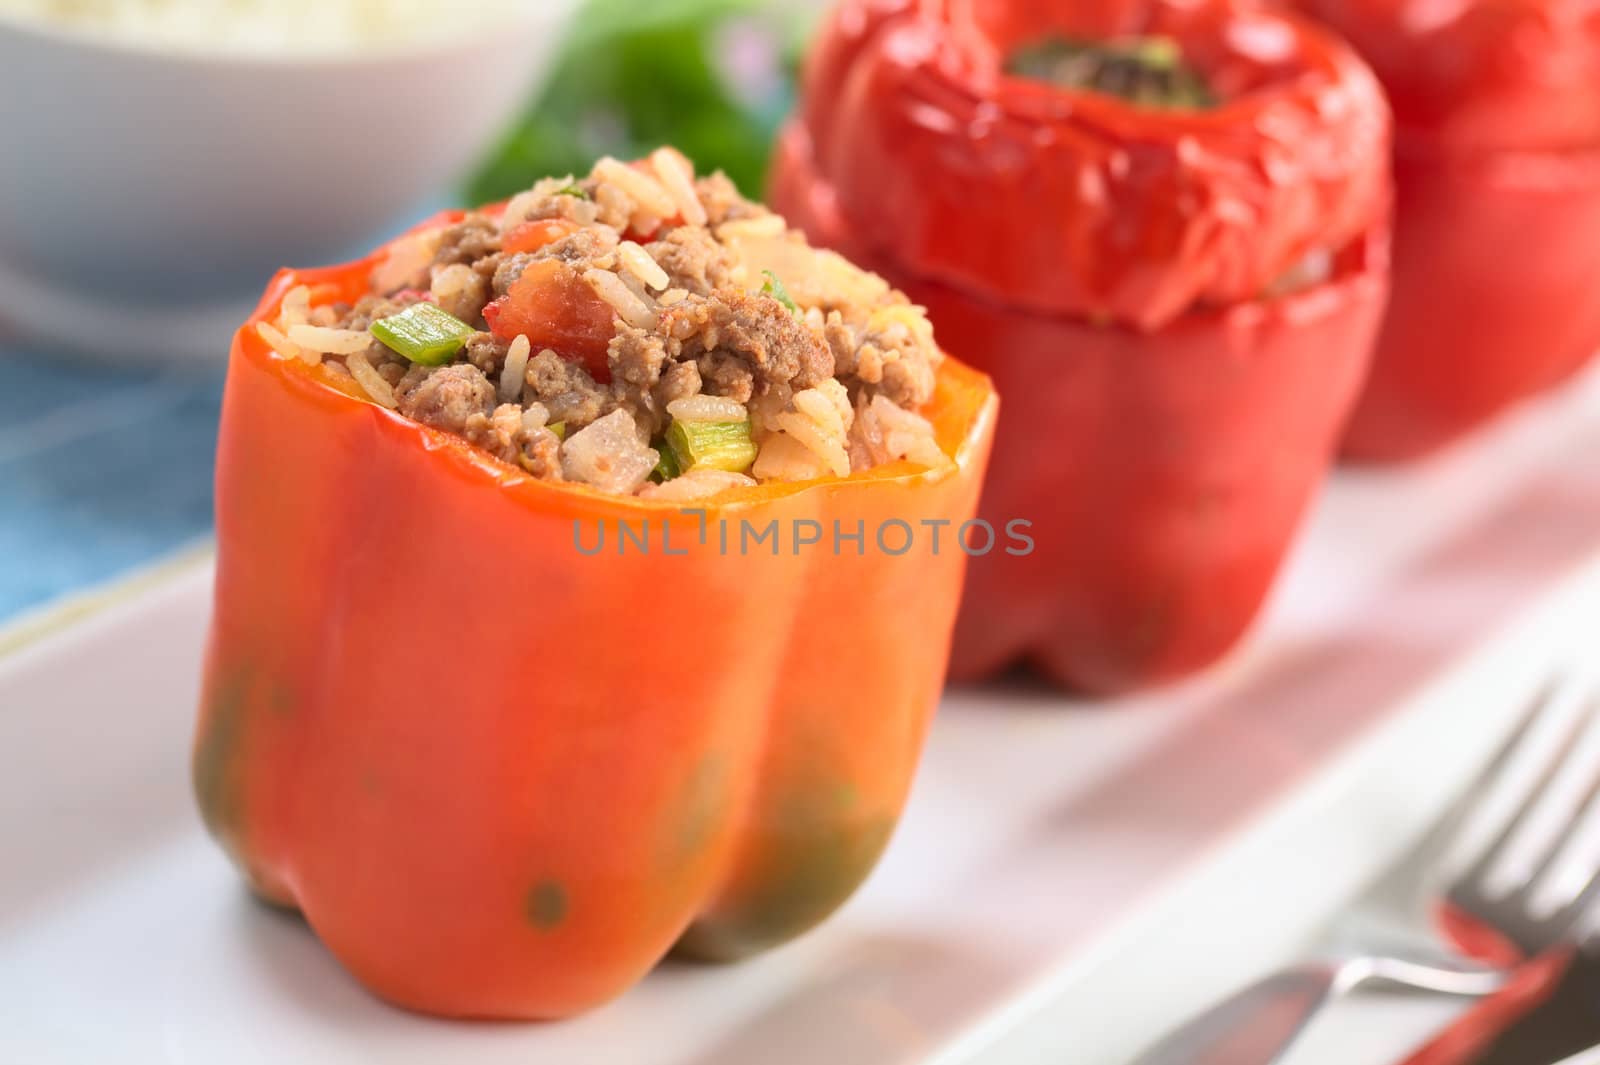 Baked stuffed red bell pepper filled with ground meat, onion, rice, tomato and green onion served on a long plate (Selective Focus, Focus on the tomato piece and the stuffing around it on the top)